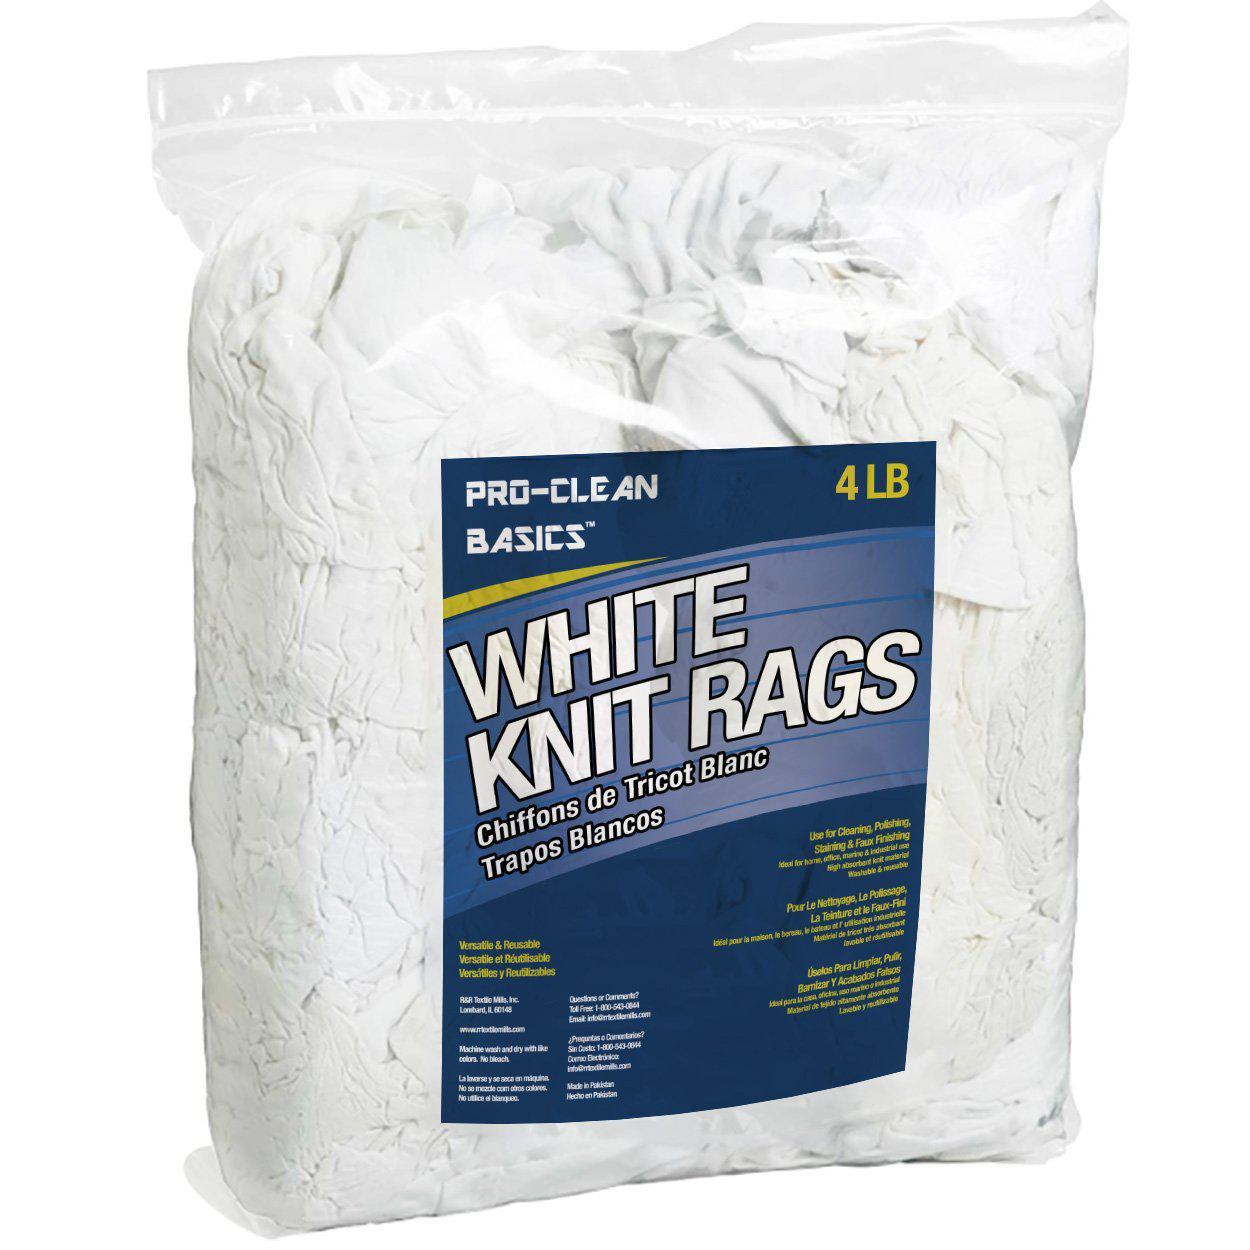 White Knit T-Shirt Cleaning Rags - 1 Pound Bag, Size: 1 lb Bag